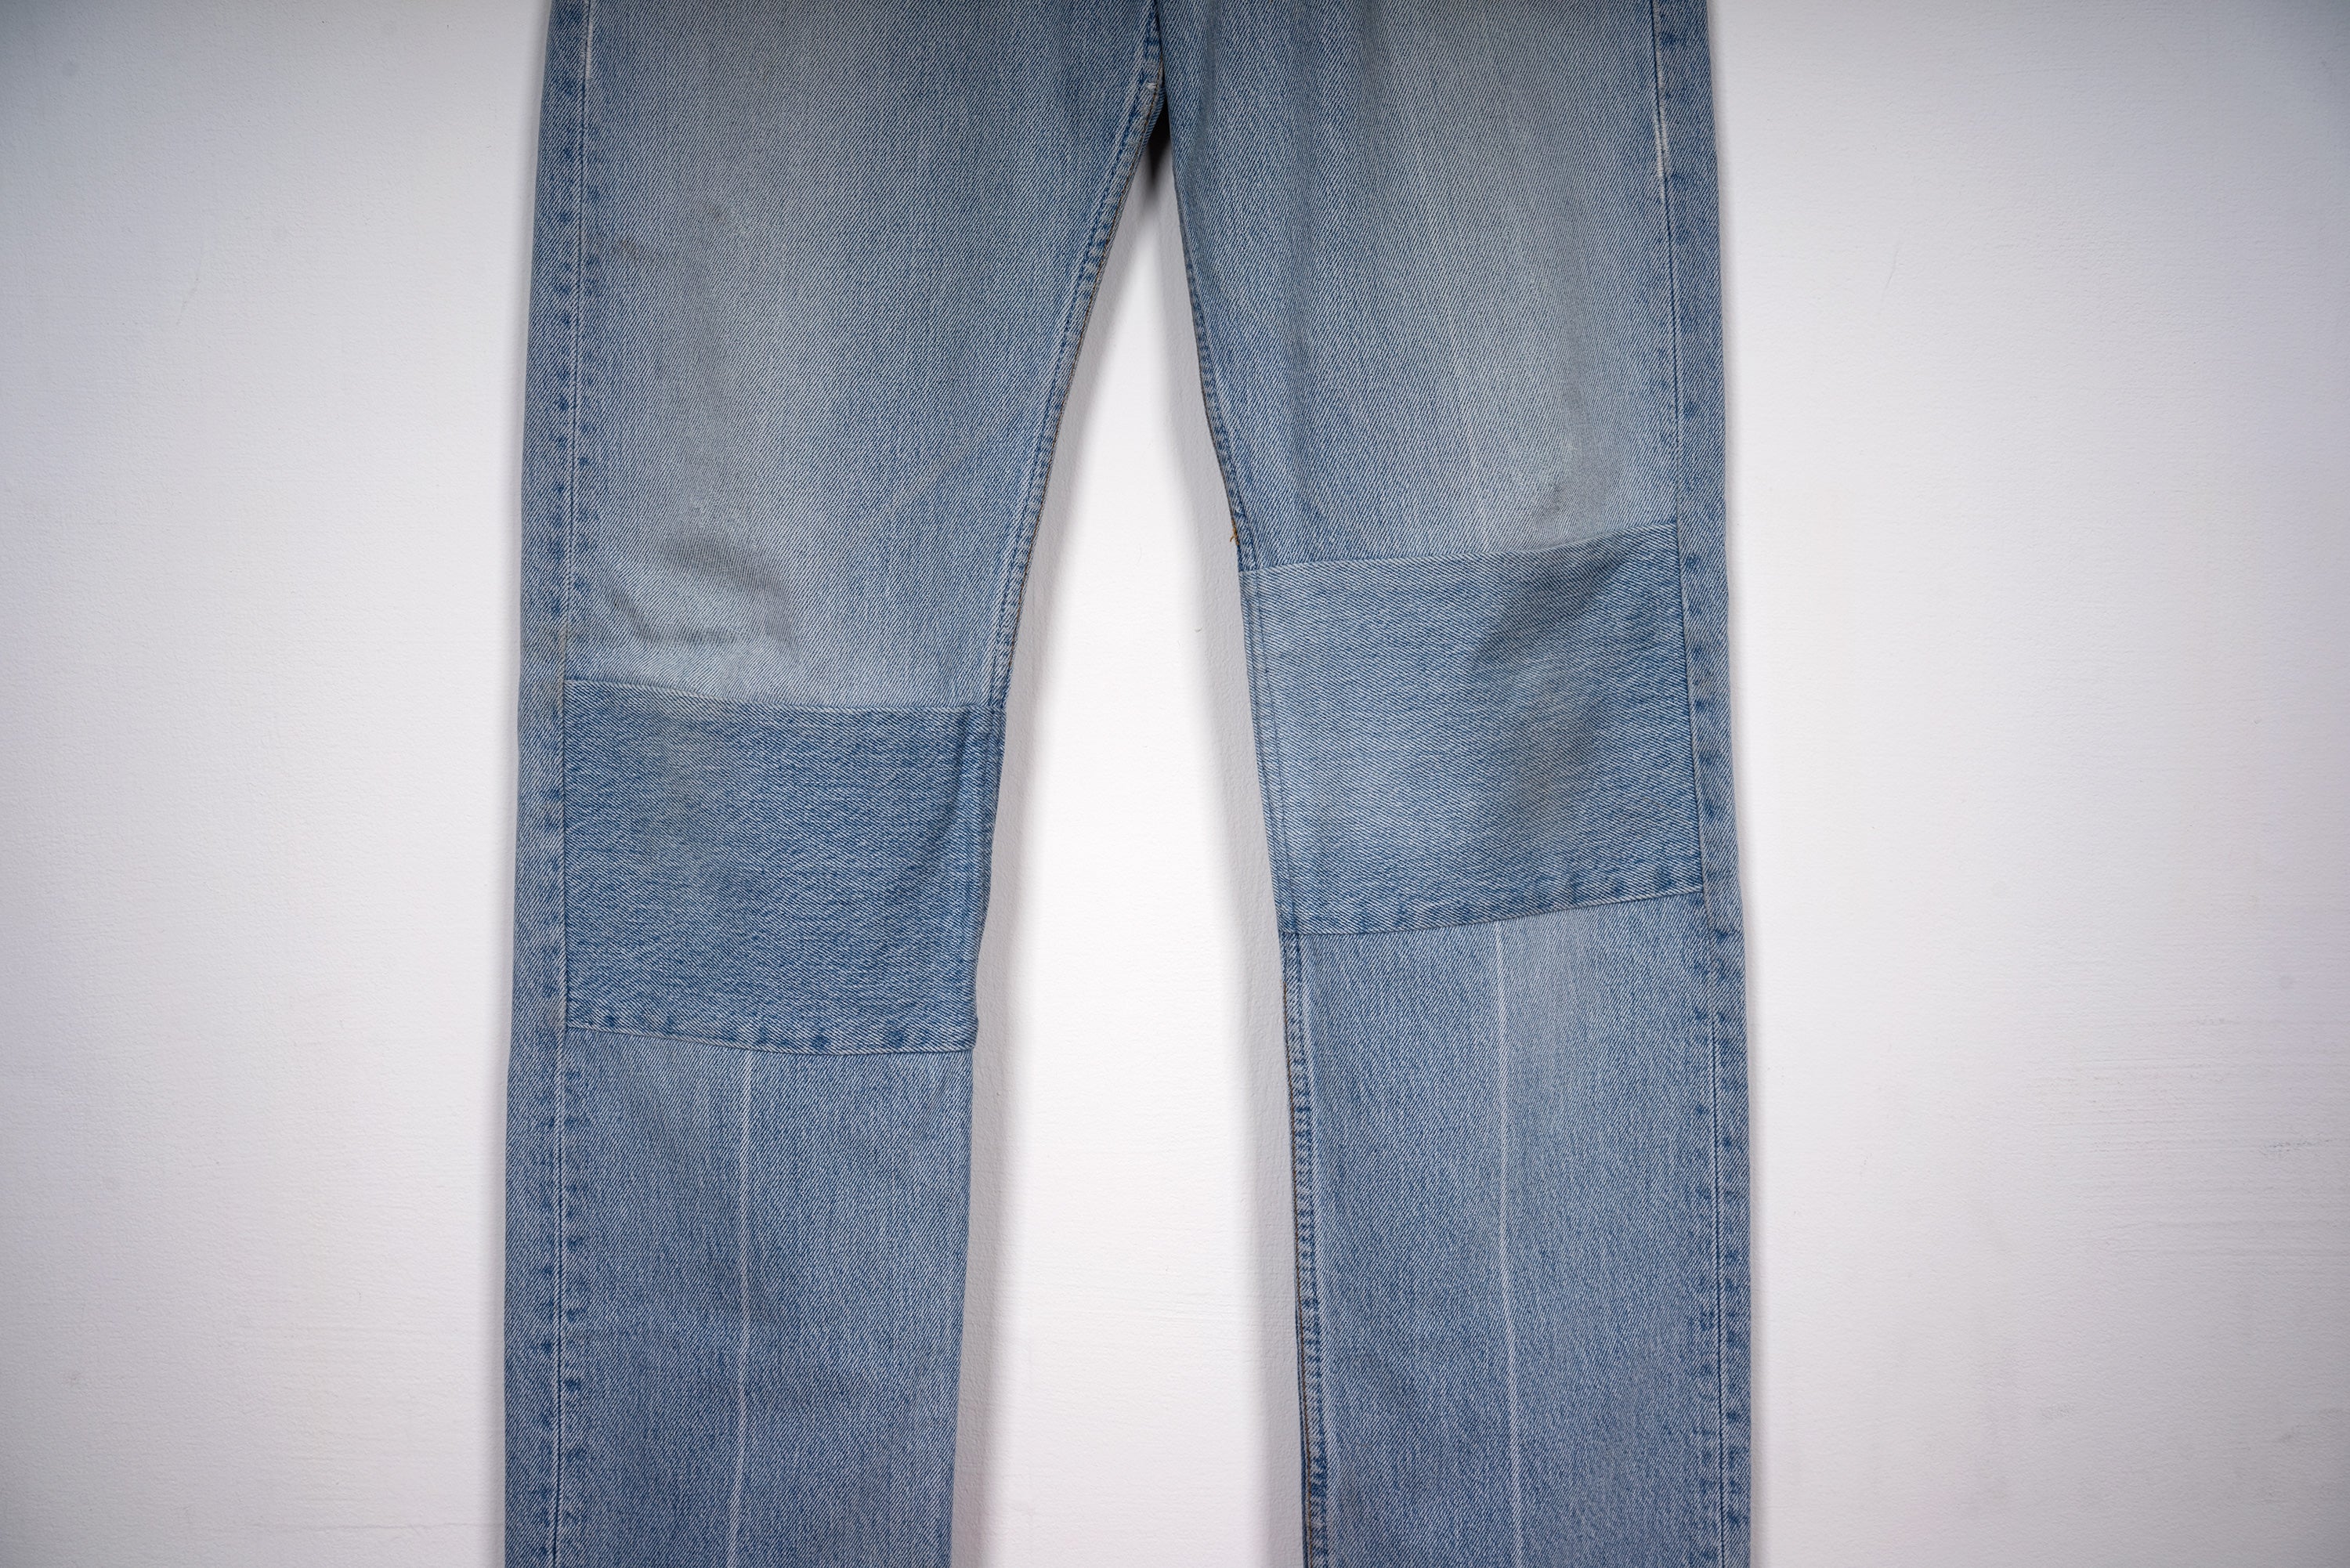 2000 A/W ARTISANAL REWORKED PATCHED JEANS